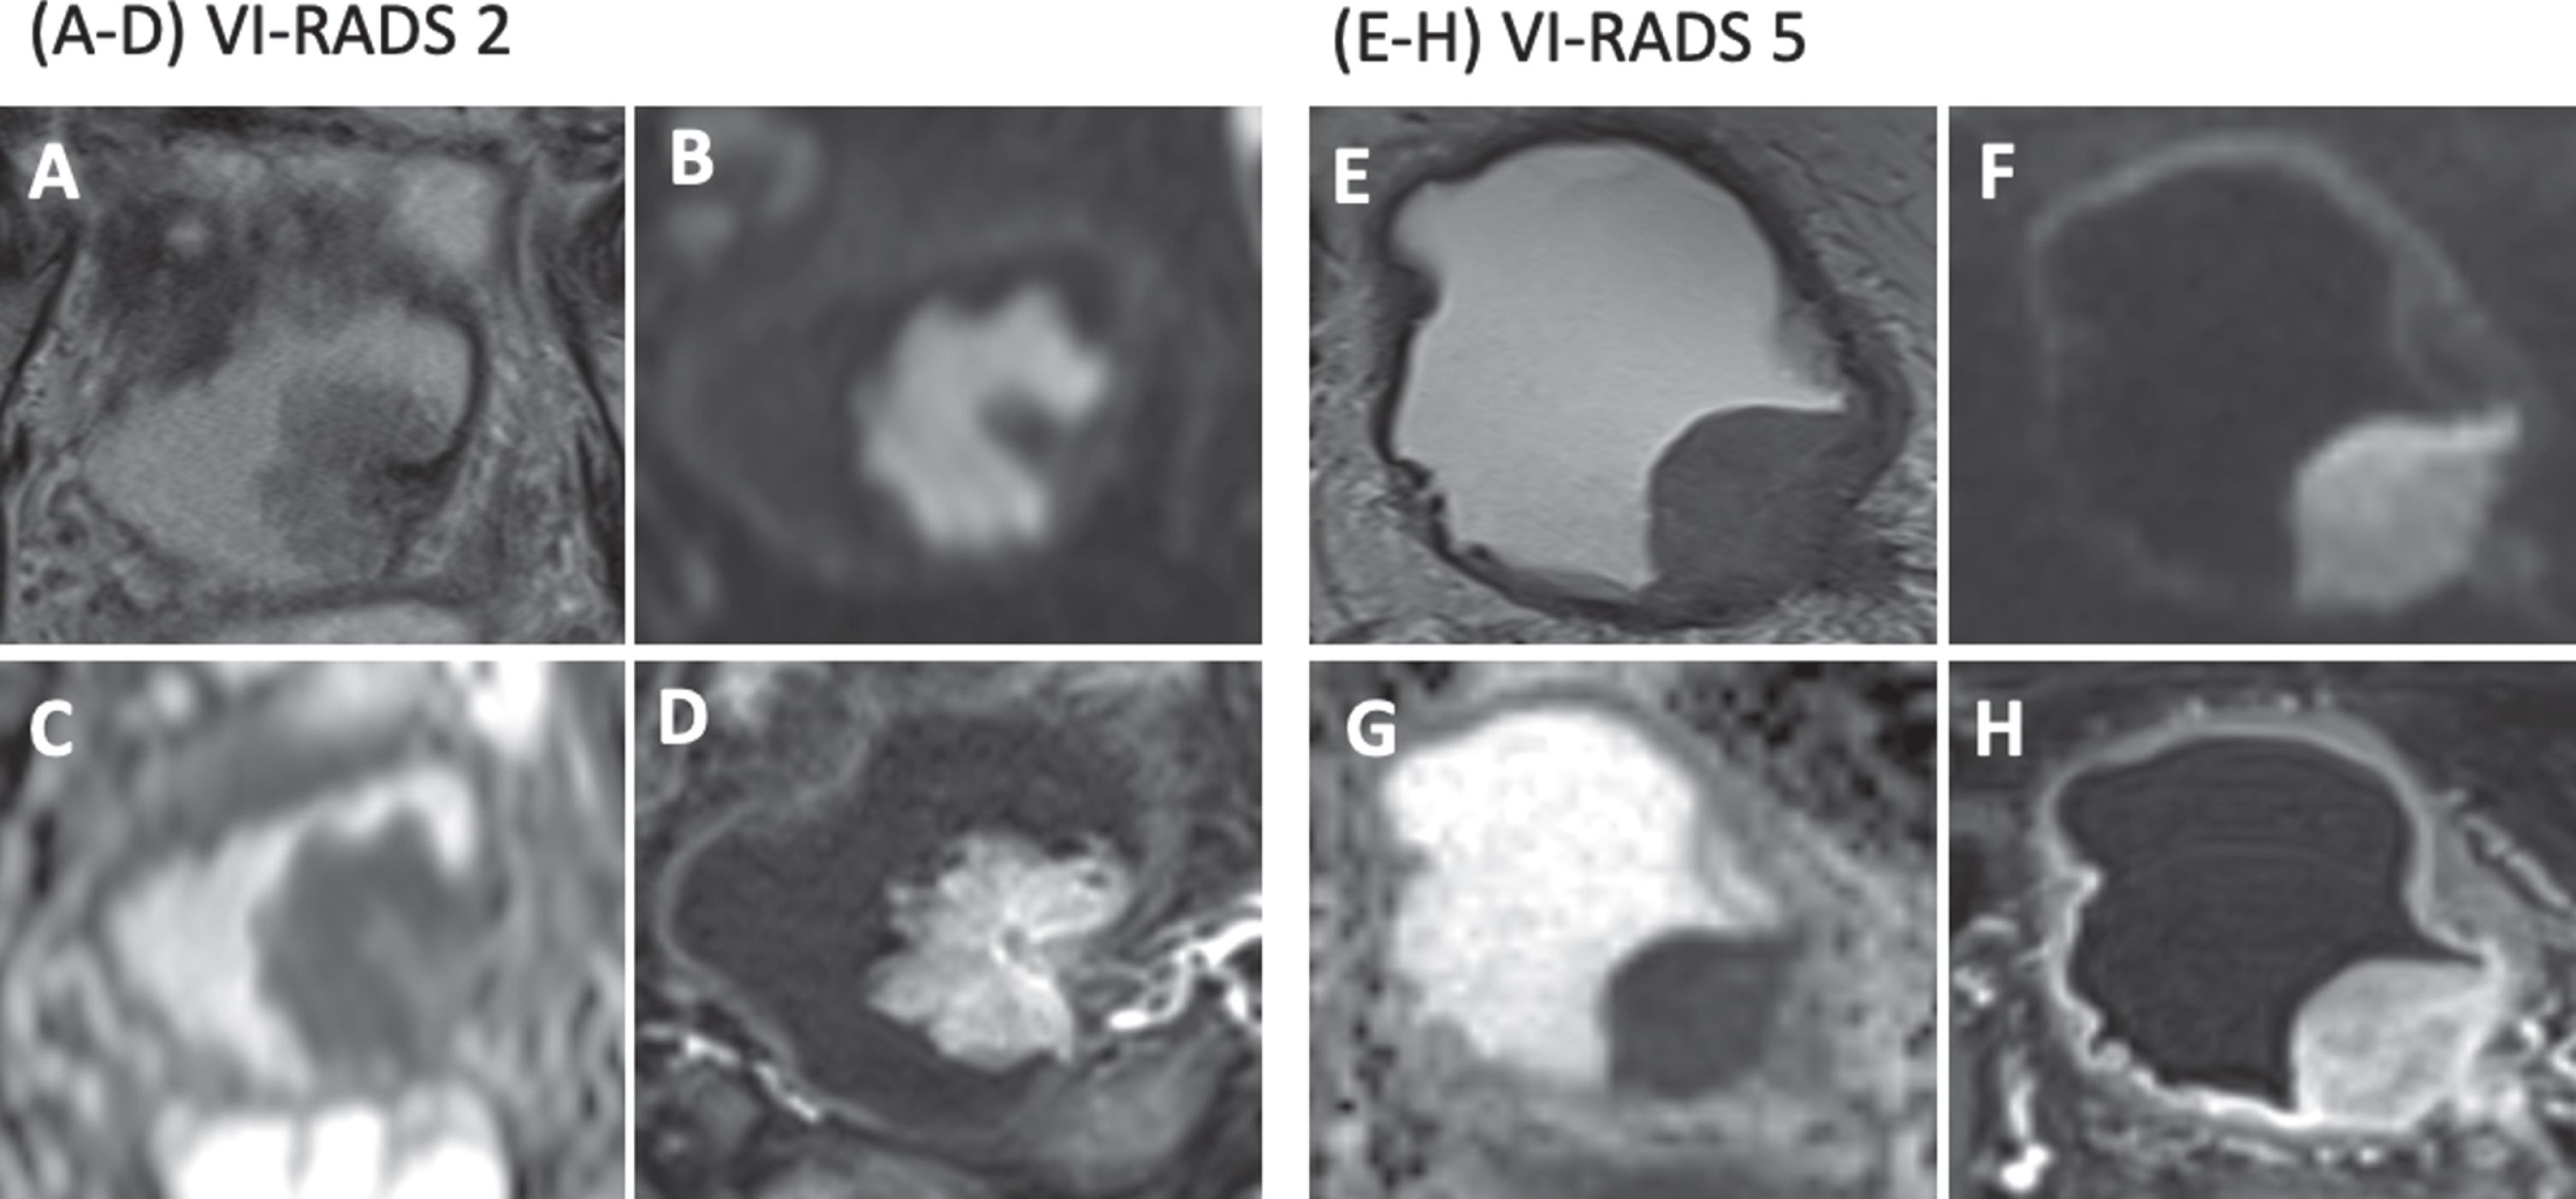 Representative MR images of bladder cancer with VI-RADS 2 and 5. A-D, MRI pictures in an 84-year-old man with pT1, G2 urothelial carcinoma. The VI-RADS score is 2. (A) An axial T2-weighted image shows a mass near the left ureteral orifice. (B) An axial b1000 DWI shows a hyper-intense mass with a hypo-intense central stalk, resembling an inchworm. (C) An ADC map. The mean absolute tumor ADC and sT-ADC were 1.25×10-3 mm2/s and 0.96, respectively. (D) A DCE-MRI shows early enhancement of the tumor but not the muscular layer. E-H, MRI pictures in a 79-year-old man with≥pT2, G3 urothelial carcinoma. The VI-RADS score is 5. (E) An axial T2-weighted image shows a mass arising from the left ureteral orifice. (F) An axial b1000 DWI shows a hyper-intense mass involving the muscular layer. (G) An ADC map. The mean absolute tumor ADC and sT-ADC were 0.84×10-3 mm2/s and 0.54, respectively. (H) A DCE MRI shows early enhancement of a tumor involving the muscular layer.